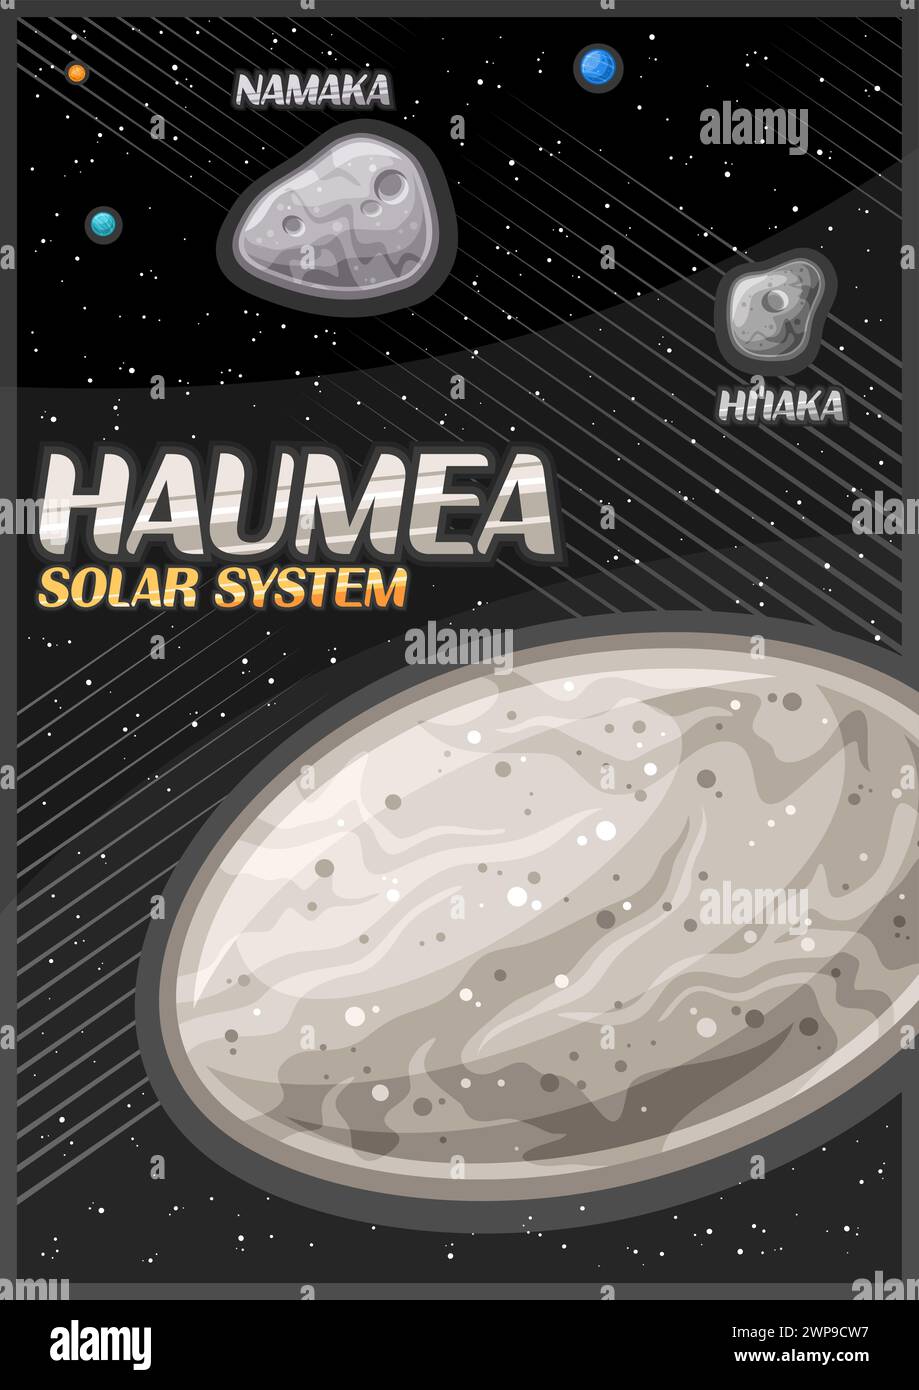 Vector Poster for Haumea, futuristic vertical banner with illustration of oval dwarf planet with moon Hi'iaka and Namaka on black starry background, f Stock Vector